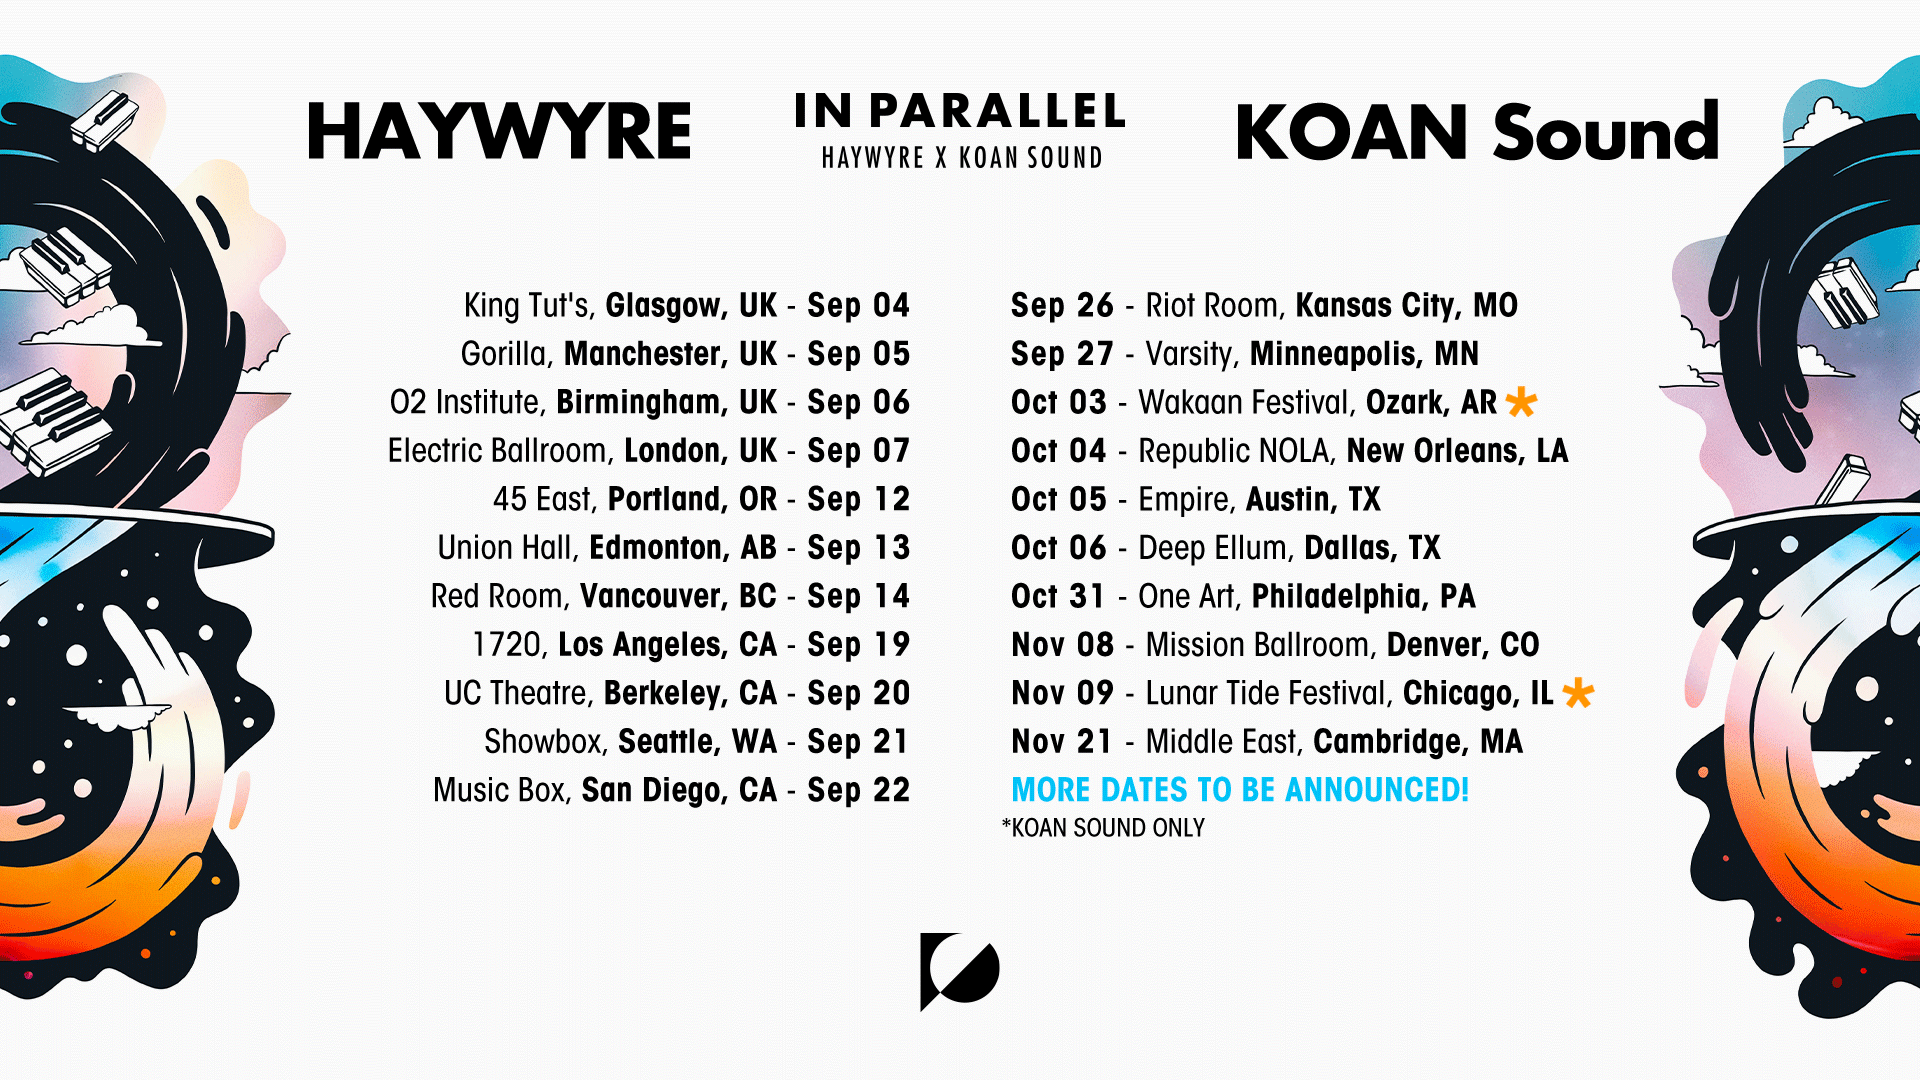 KOAN Sound announce ‘Intervals Above’ EP along with North American live tourKoan Sound Haywyre In Parallel Tour Dates